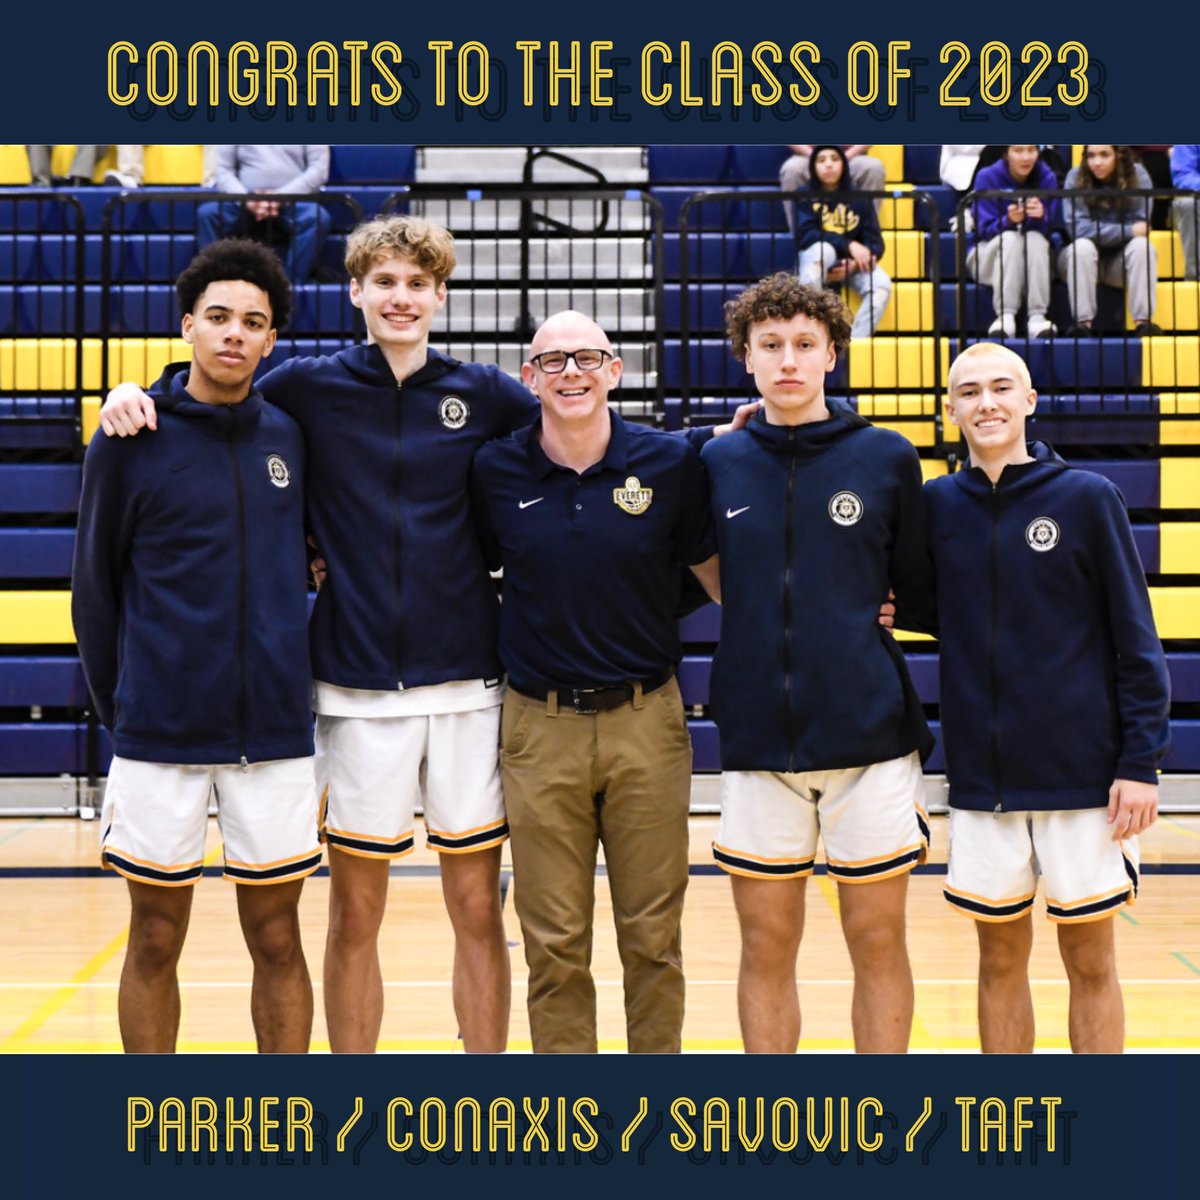 GRADUATION DAY!  Congrats to our guys Isaiah Parker @haydenconaxis__ @daniel_savovic & @Jakobtaft2023 on competing their Seagull journey!  They lifted our program culture & play, and each have extremely bright futures.  Enjoy the day fellas…you’ve earned it💙💛 #UnitedAsOne